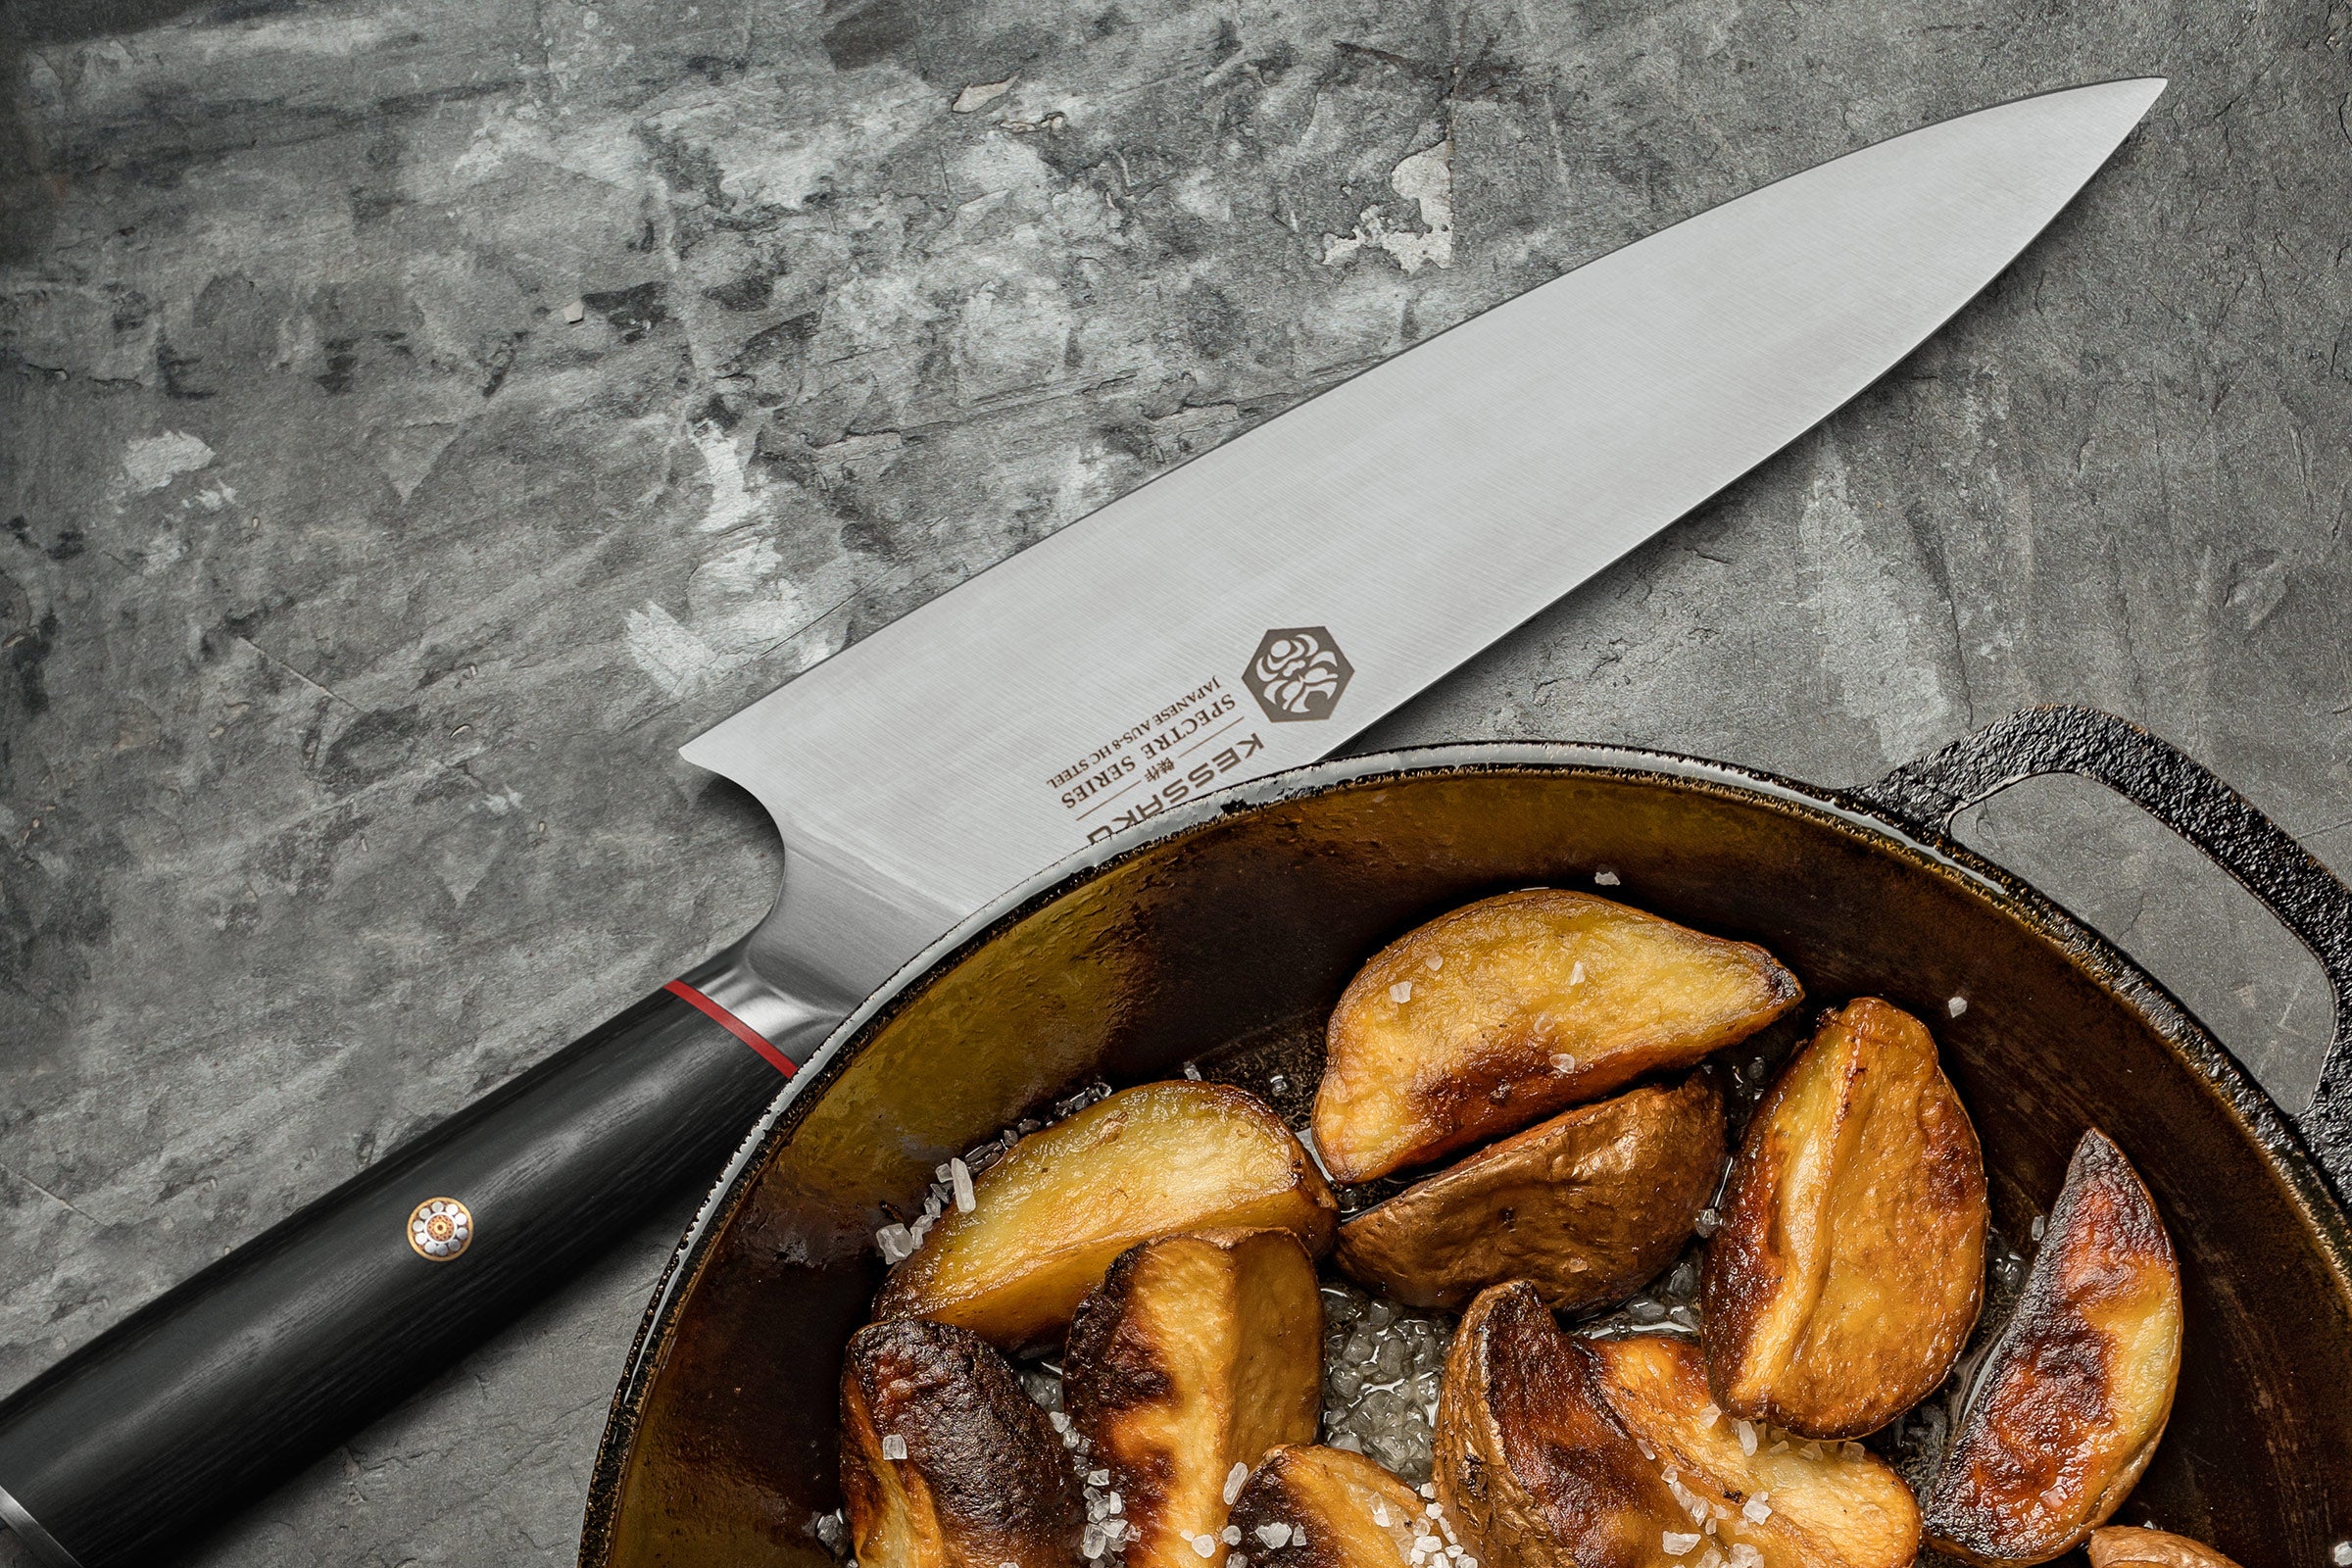 The Spectre Chef's Knife next to a skillet of potatoes wedges frying.